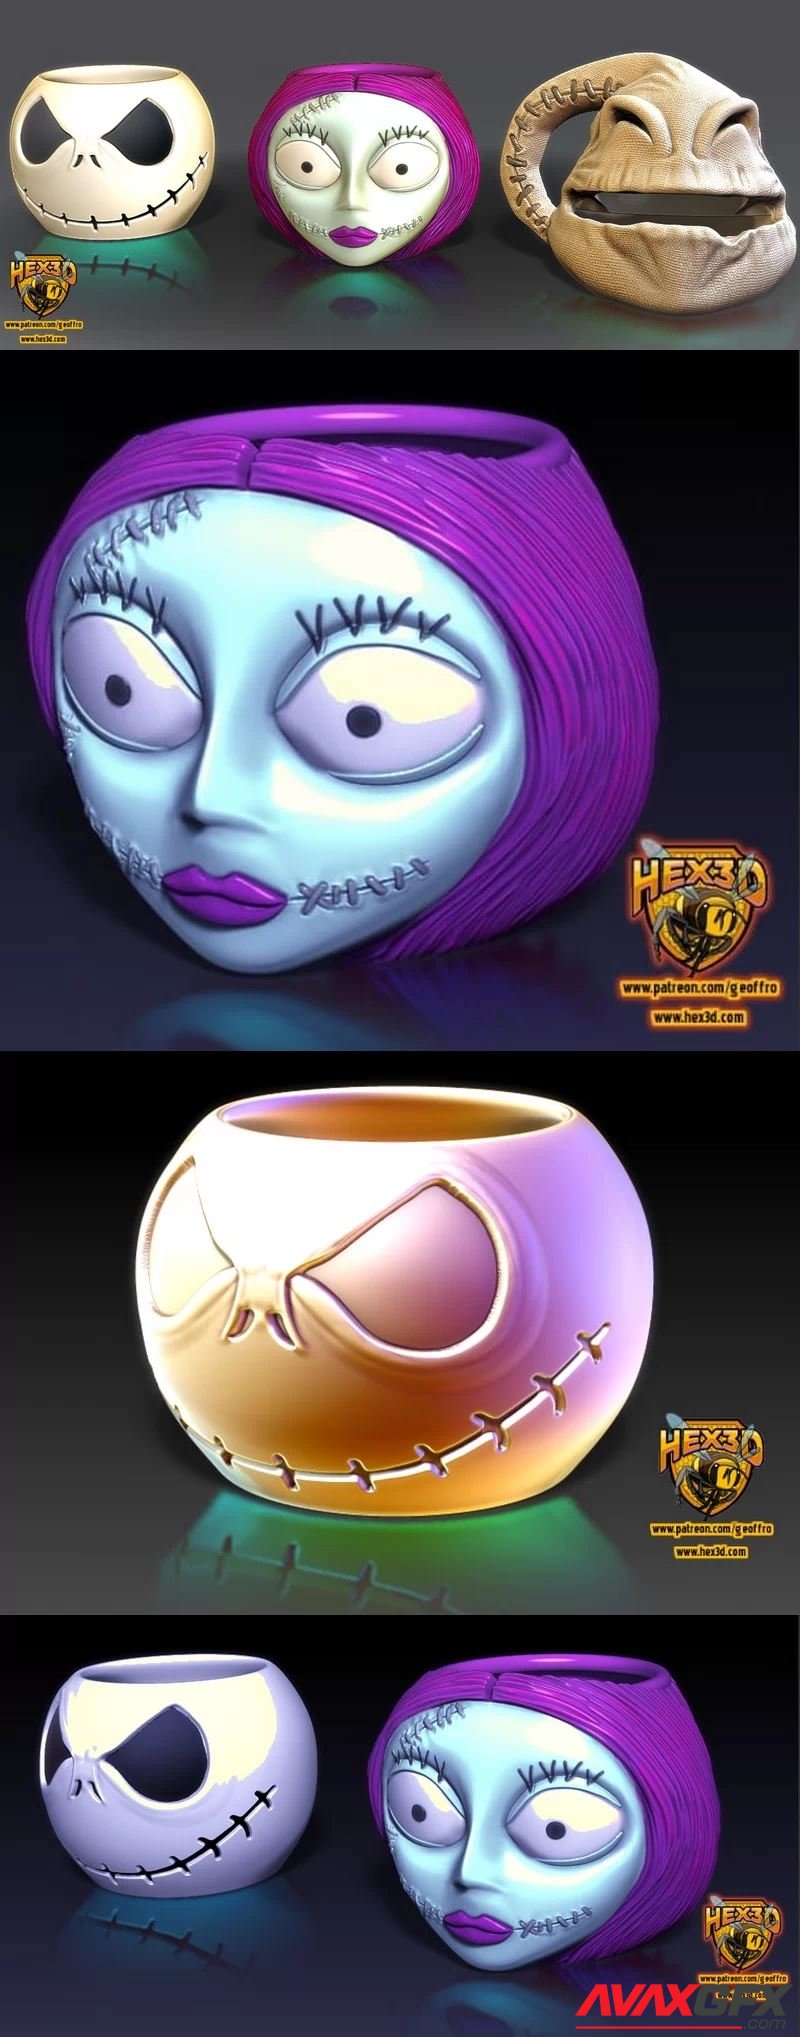 Hex3D - Ooogie Boogie Bowl and Mug